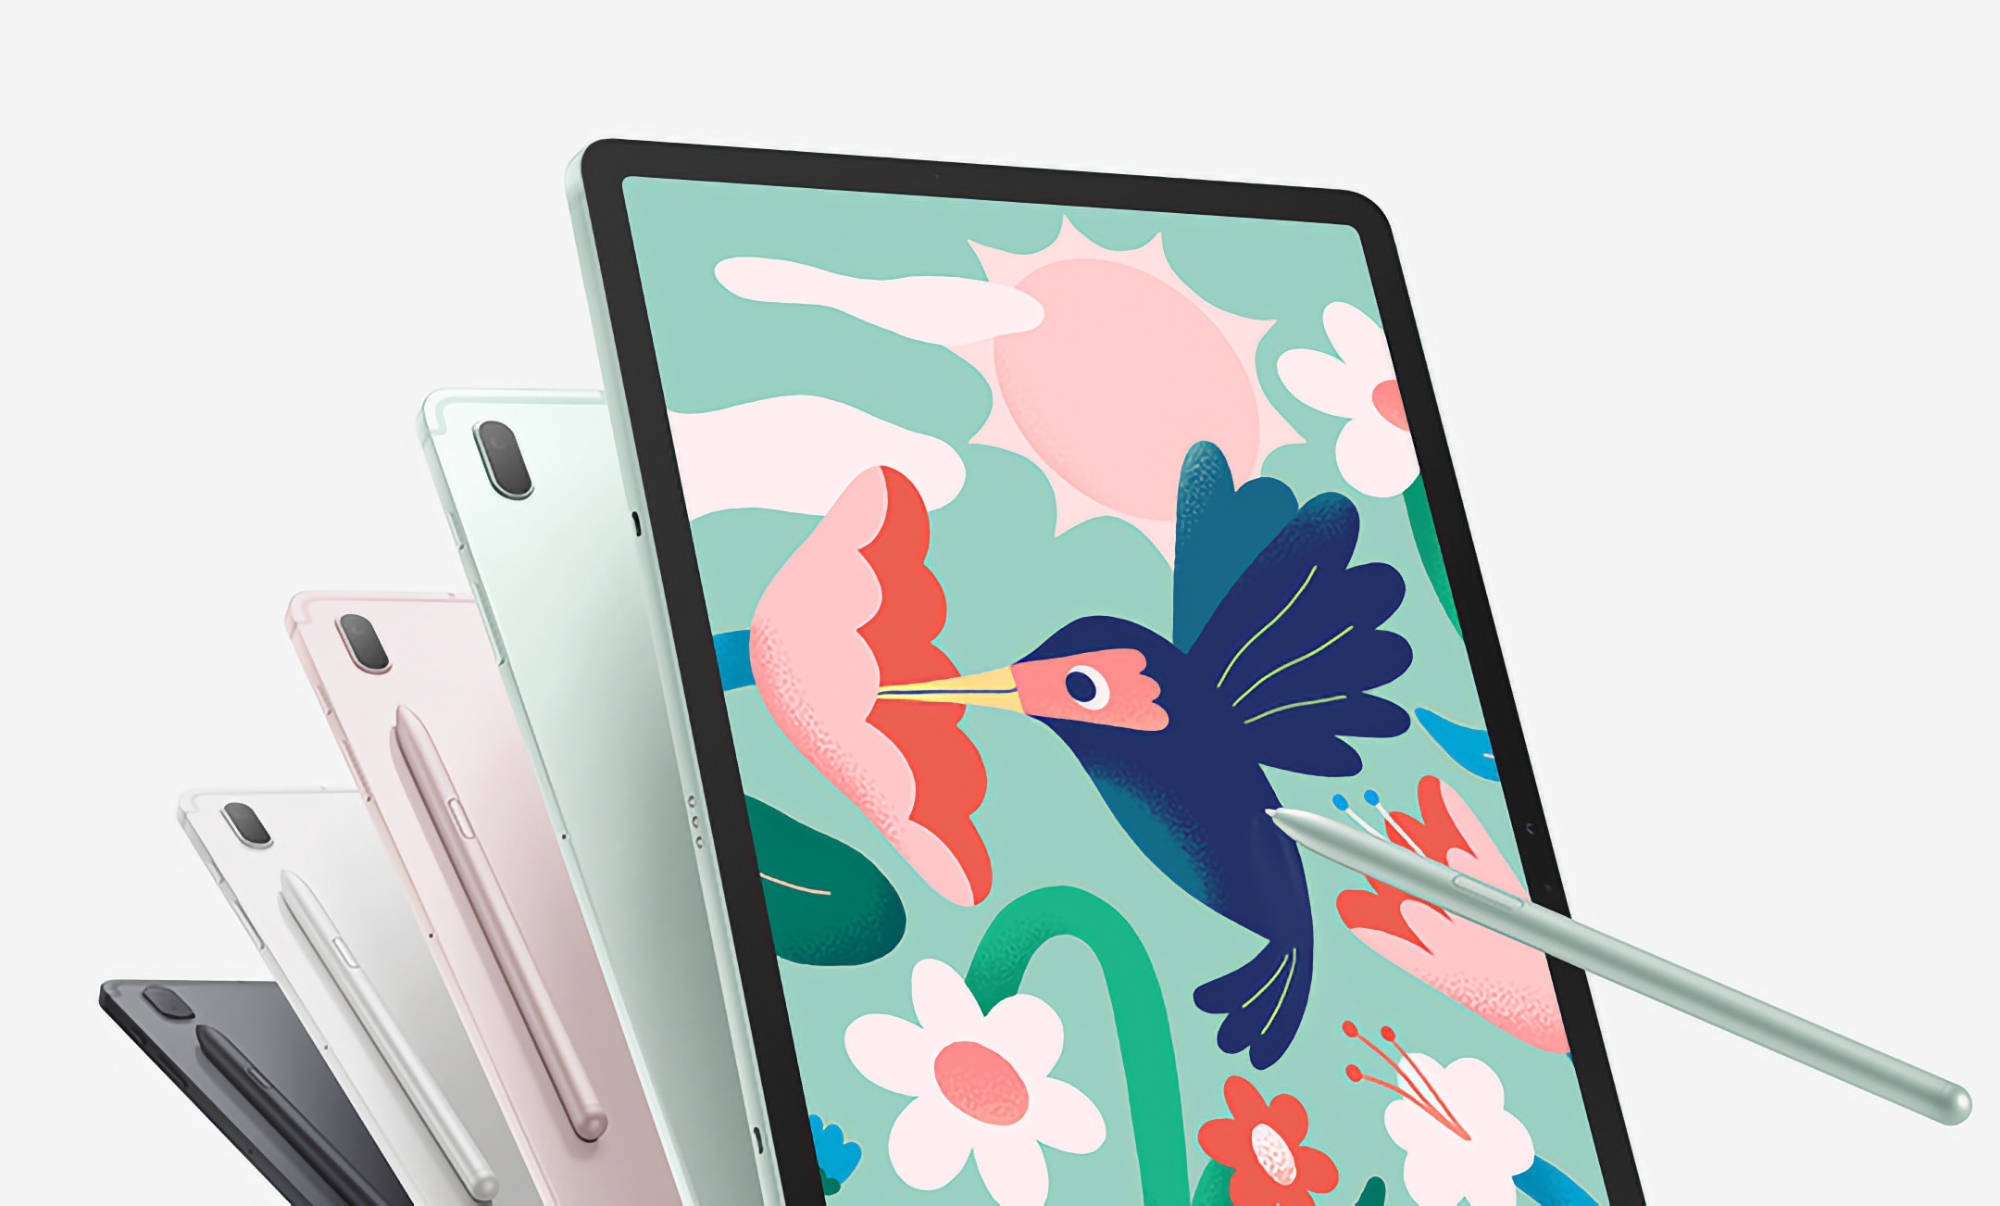 Insider: Galaxy Tab S8 FE tablet will get an LCD display and S Pen made by Wacom